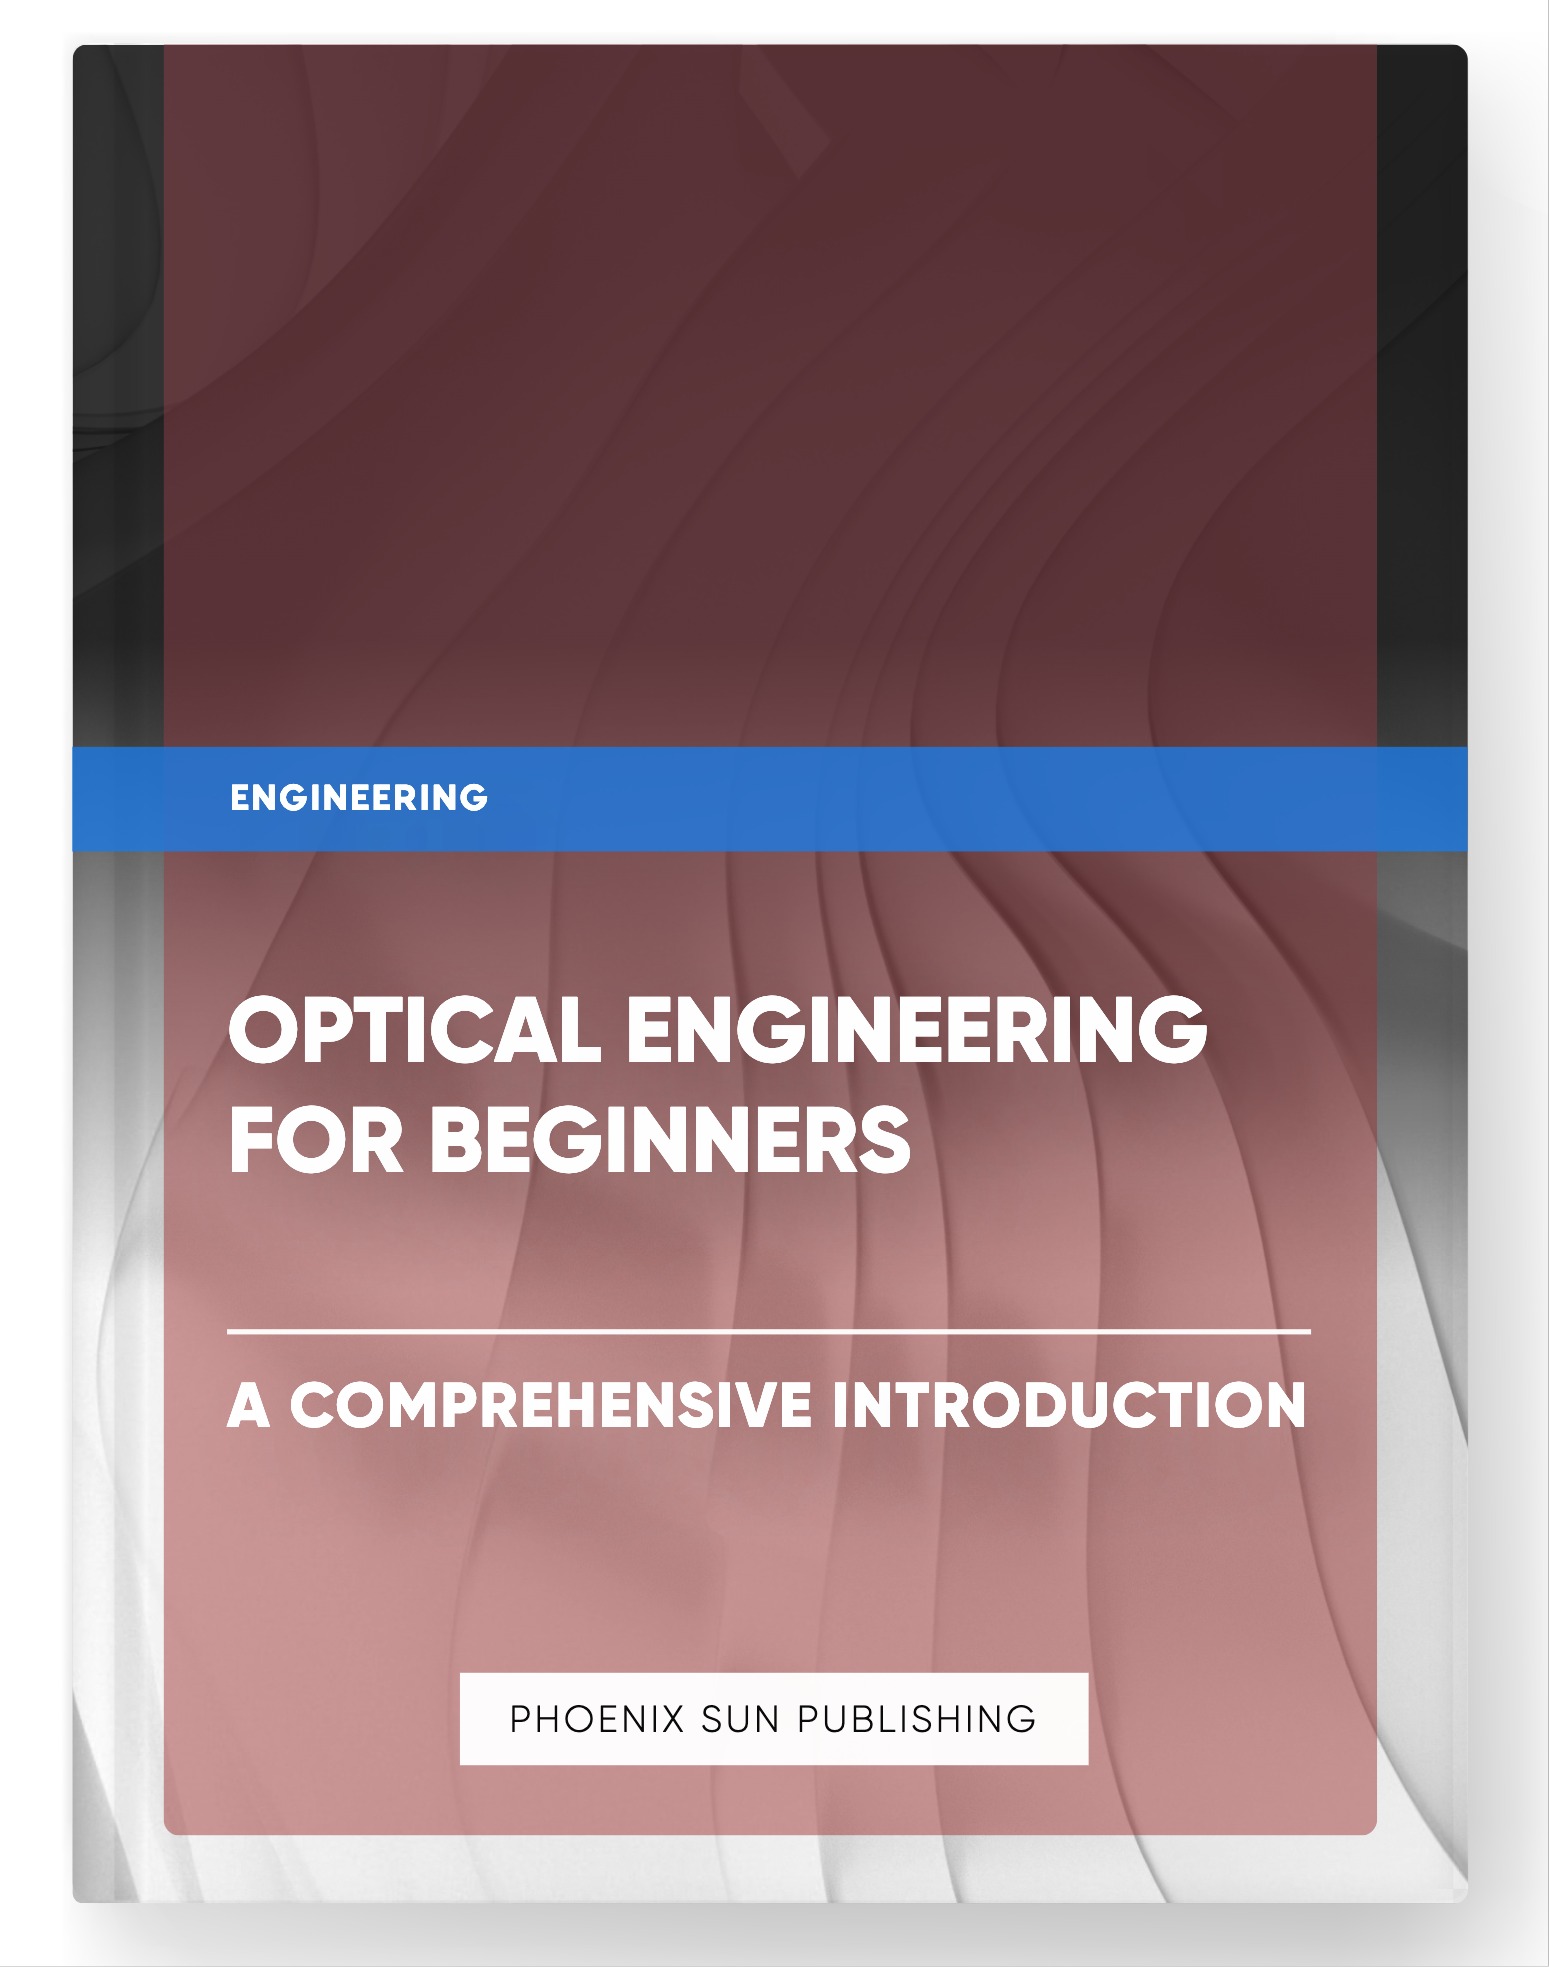 Optical Engineering for Beginners – A Comprehensive Introduction